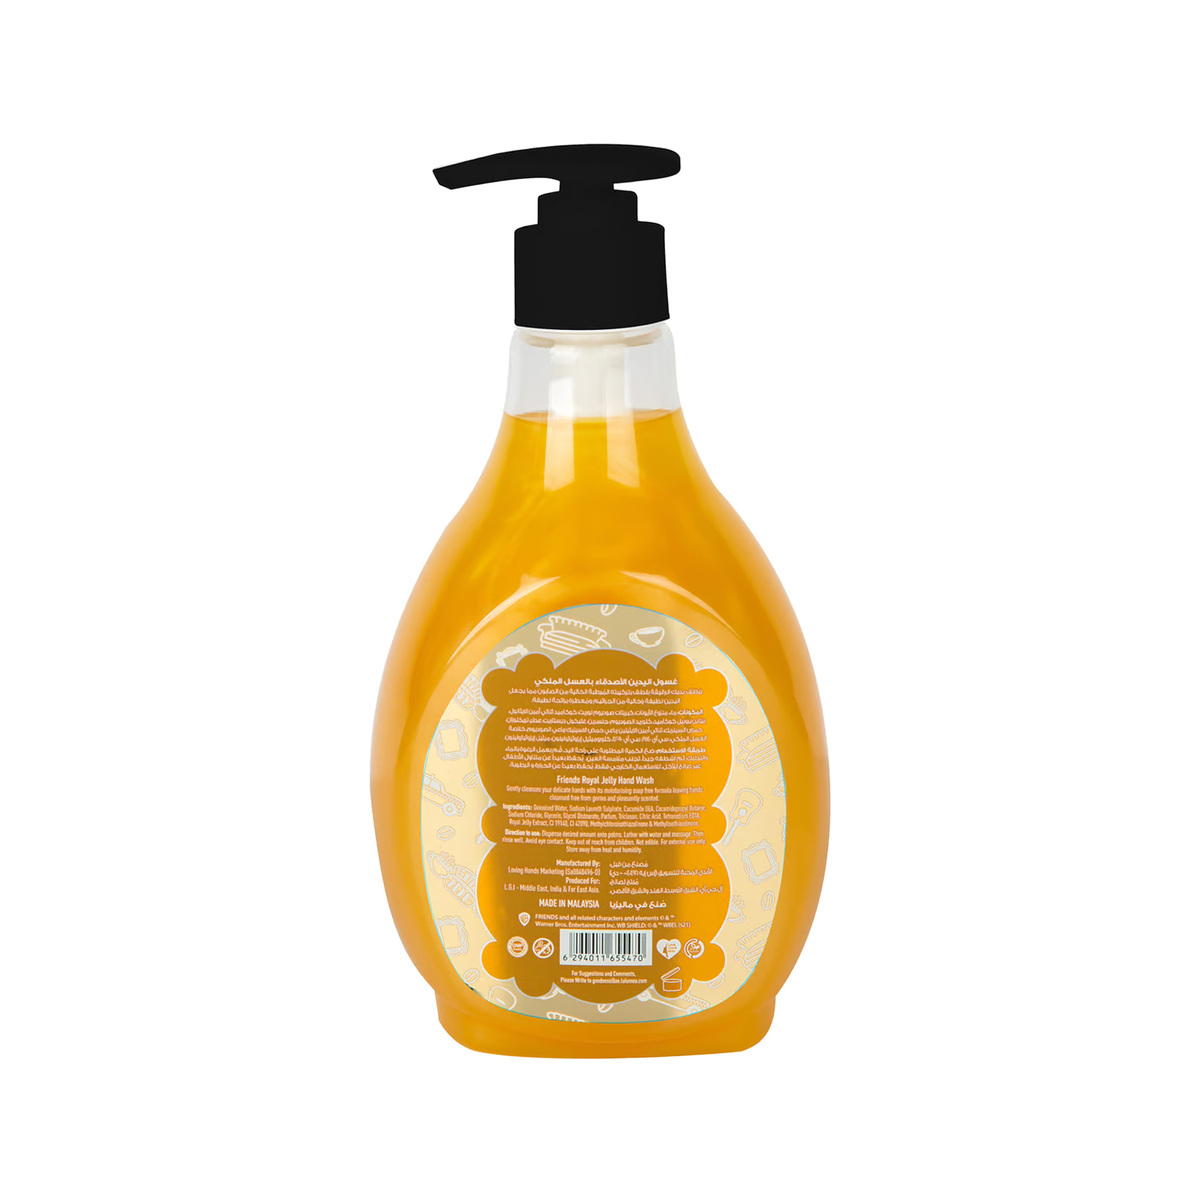 Friends Royal Jelly Antibacterial Hand Wash 2 x 500 ml